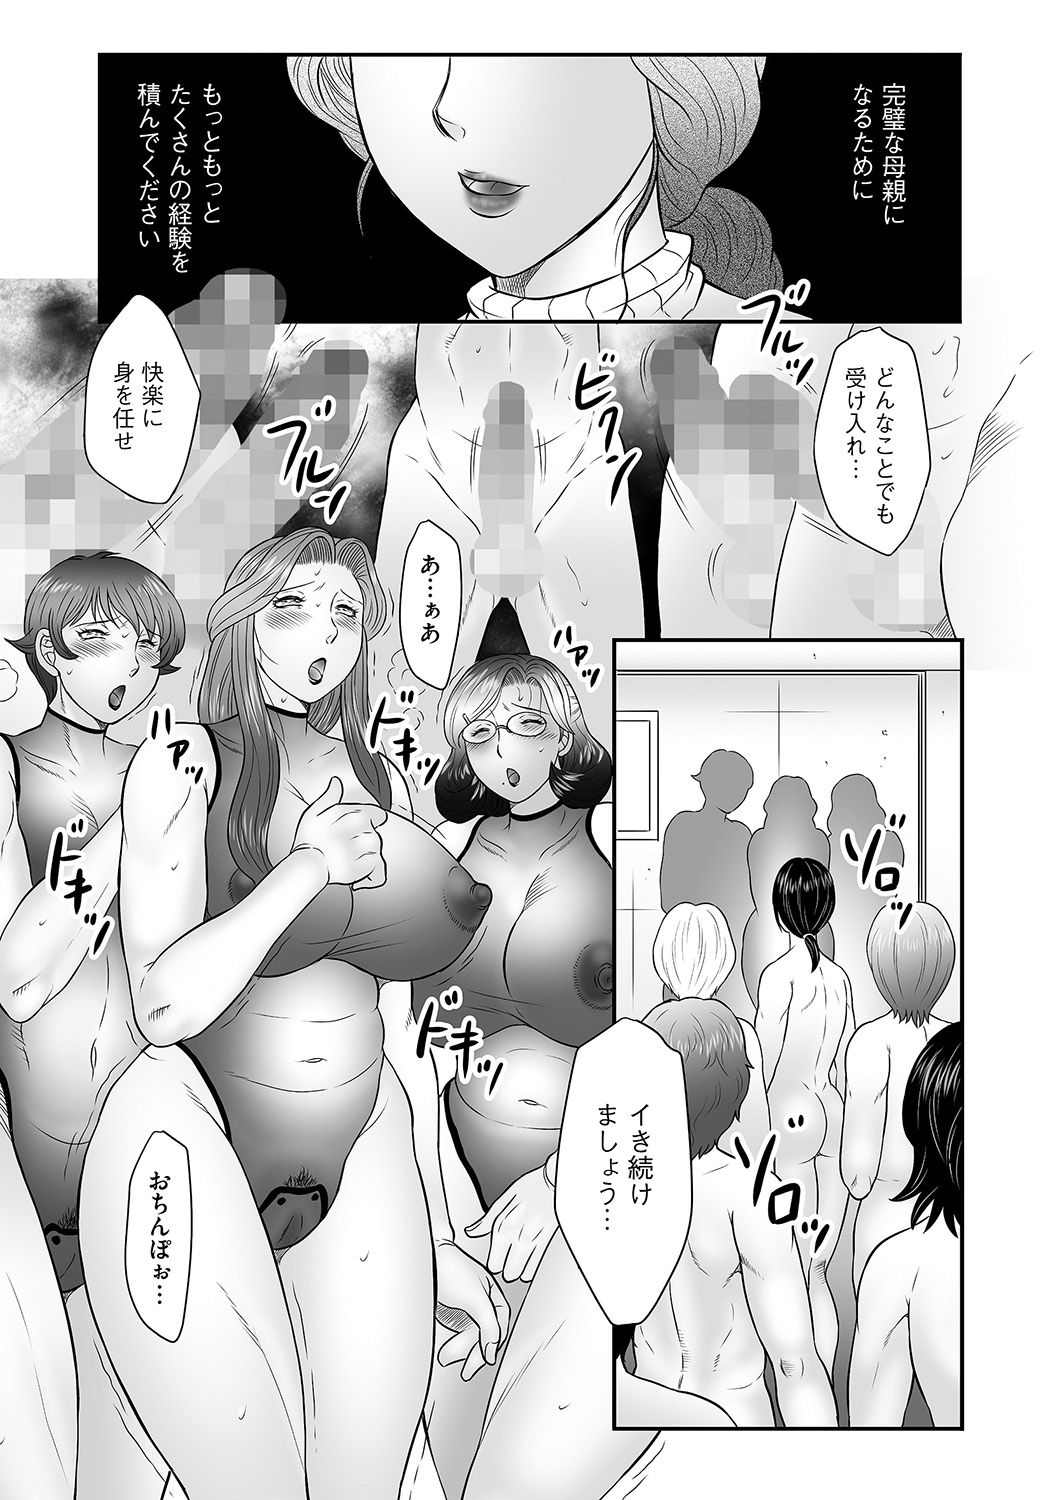 [Fuusen Club] Boshi no Susume - The advice of the mother and child Ch. 13 (Magazine Cyberia Vol. 72) [Digital] [風船クラブ] 母子のすすめ 第13話 (マガジンサイベリア Vol.72) [DL版]